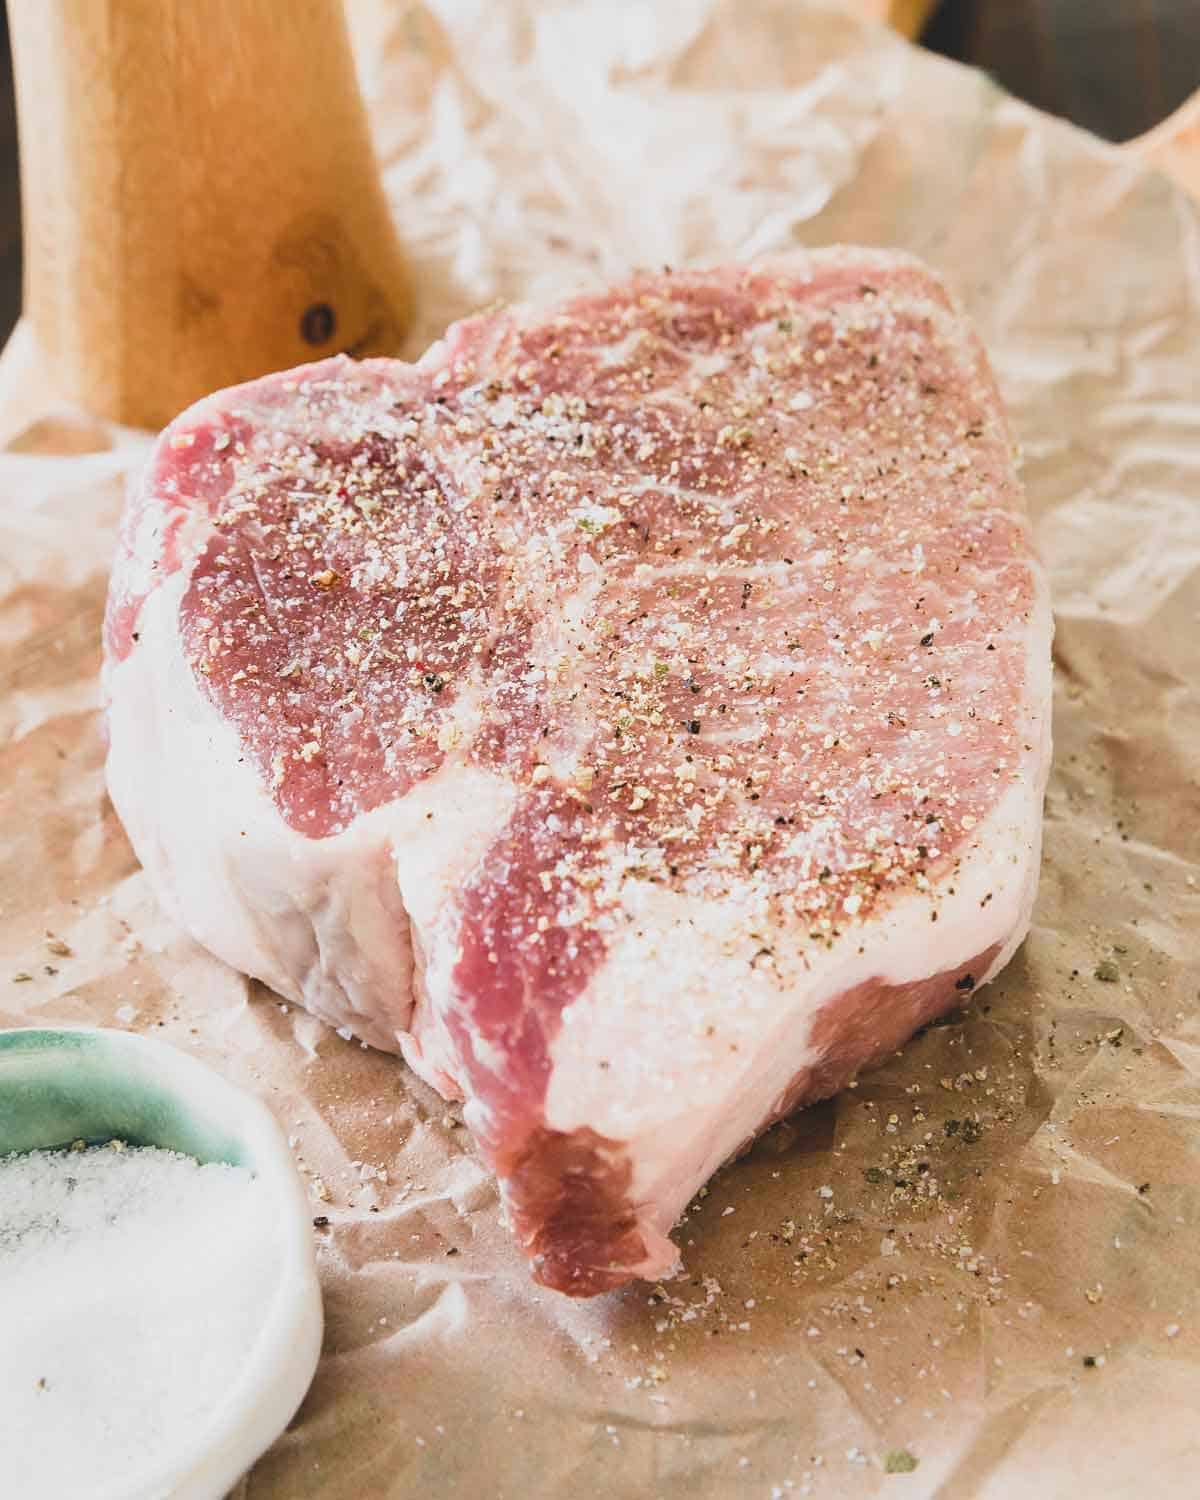 A simple recipe for how to cook pork chops in a cast iron skillet.